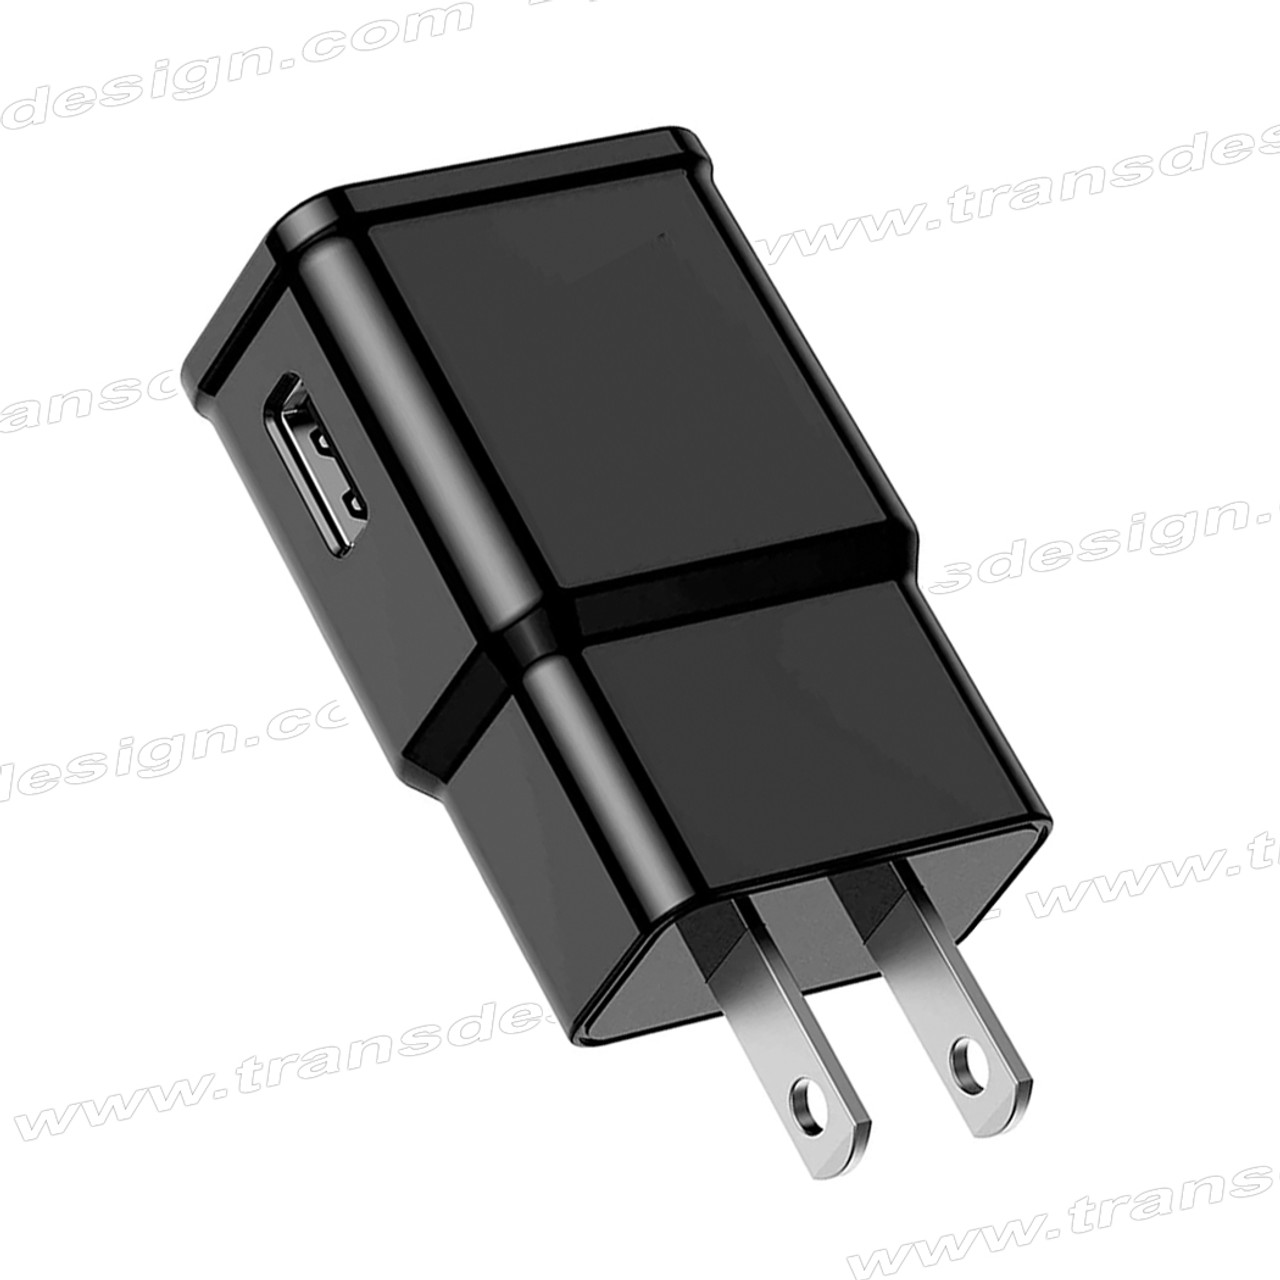 AC DC 5V 2A Micro USB Travel Home Wall Charger Adapter Power